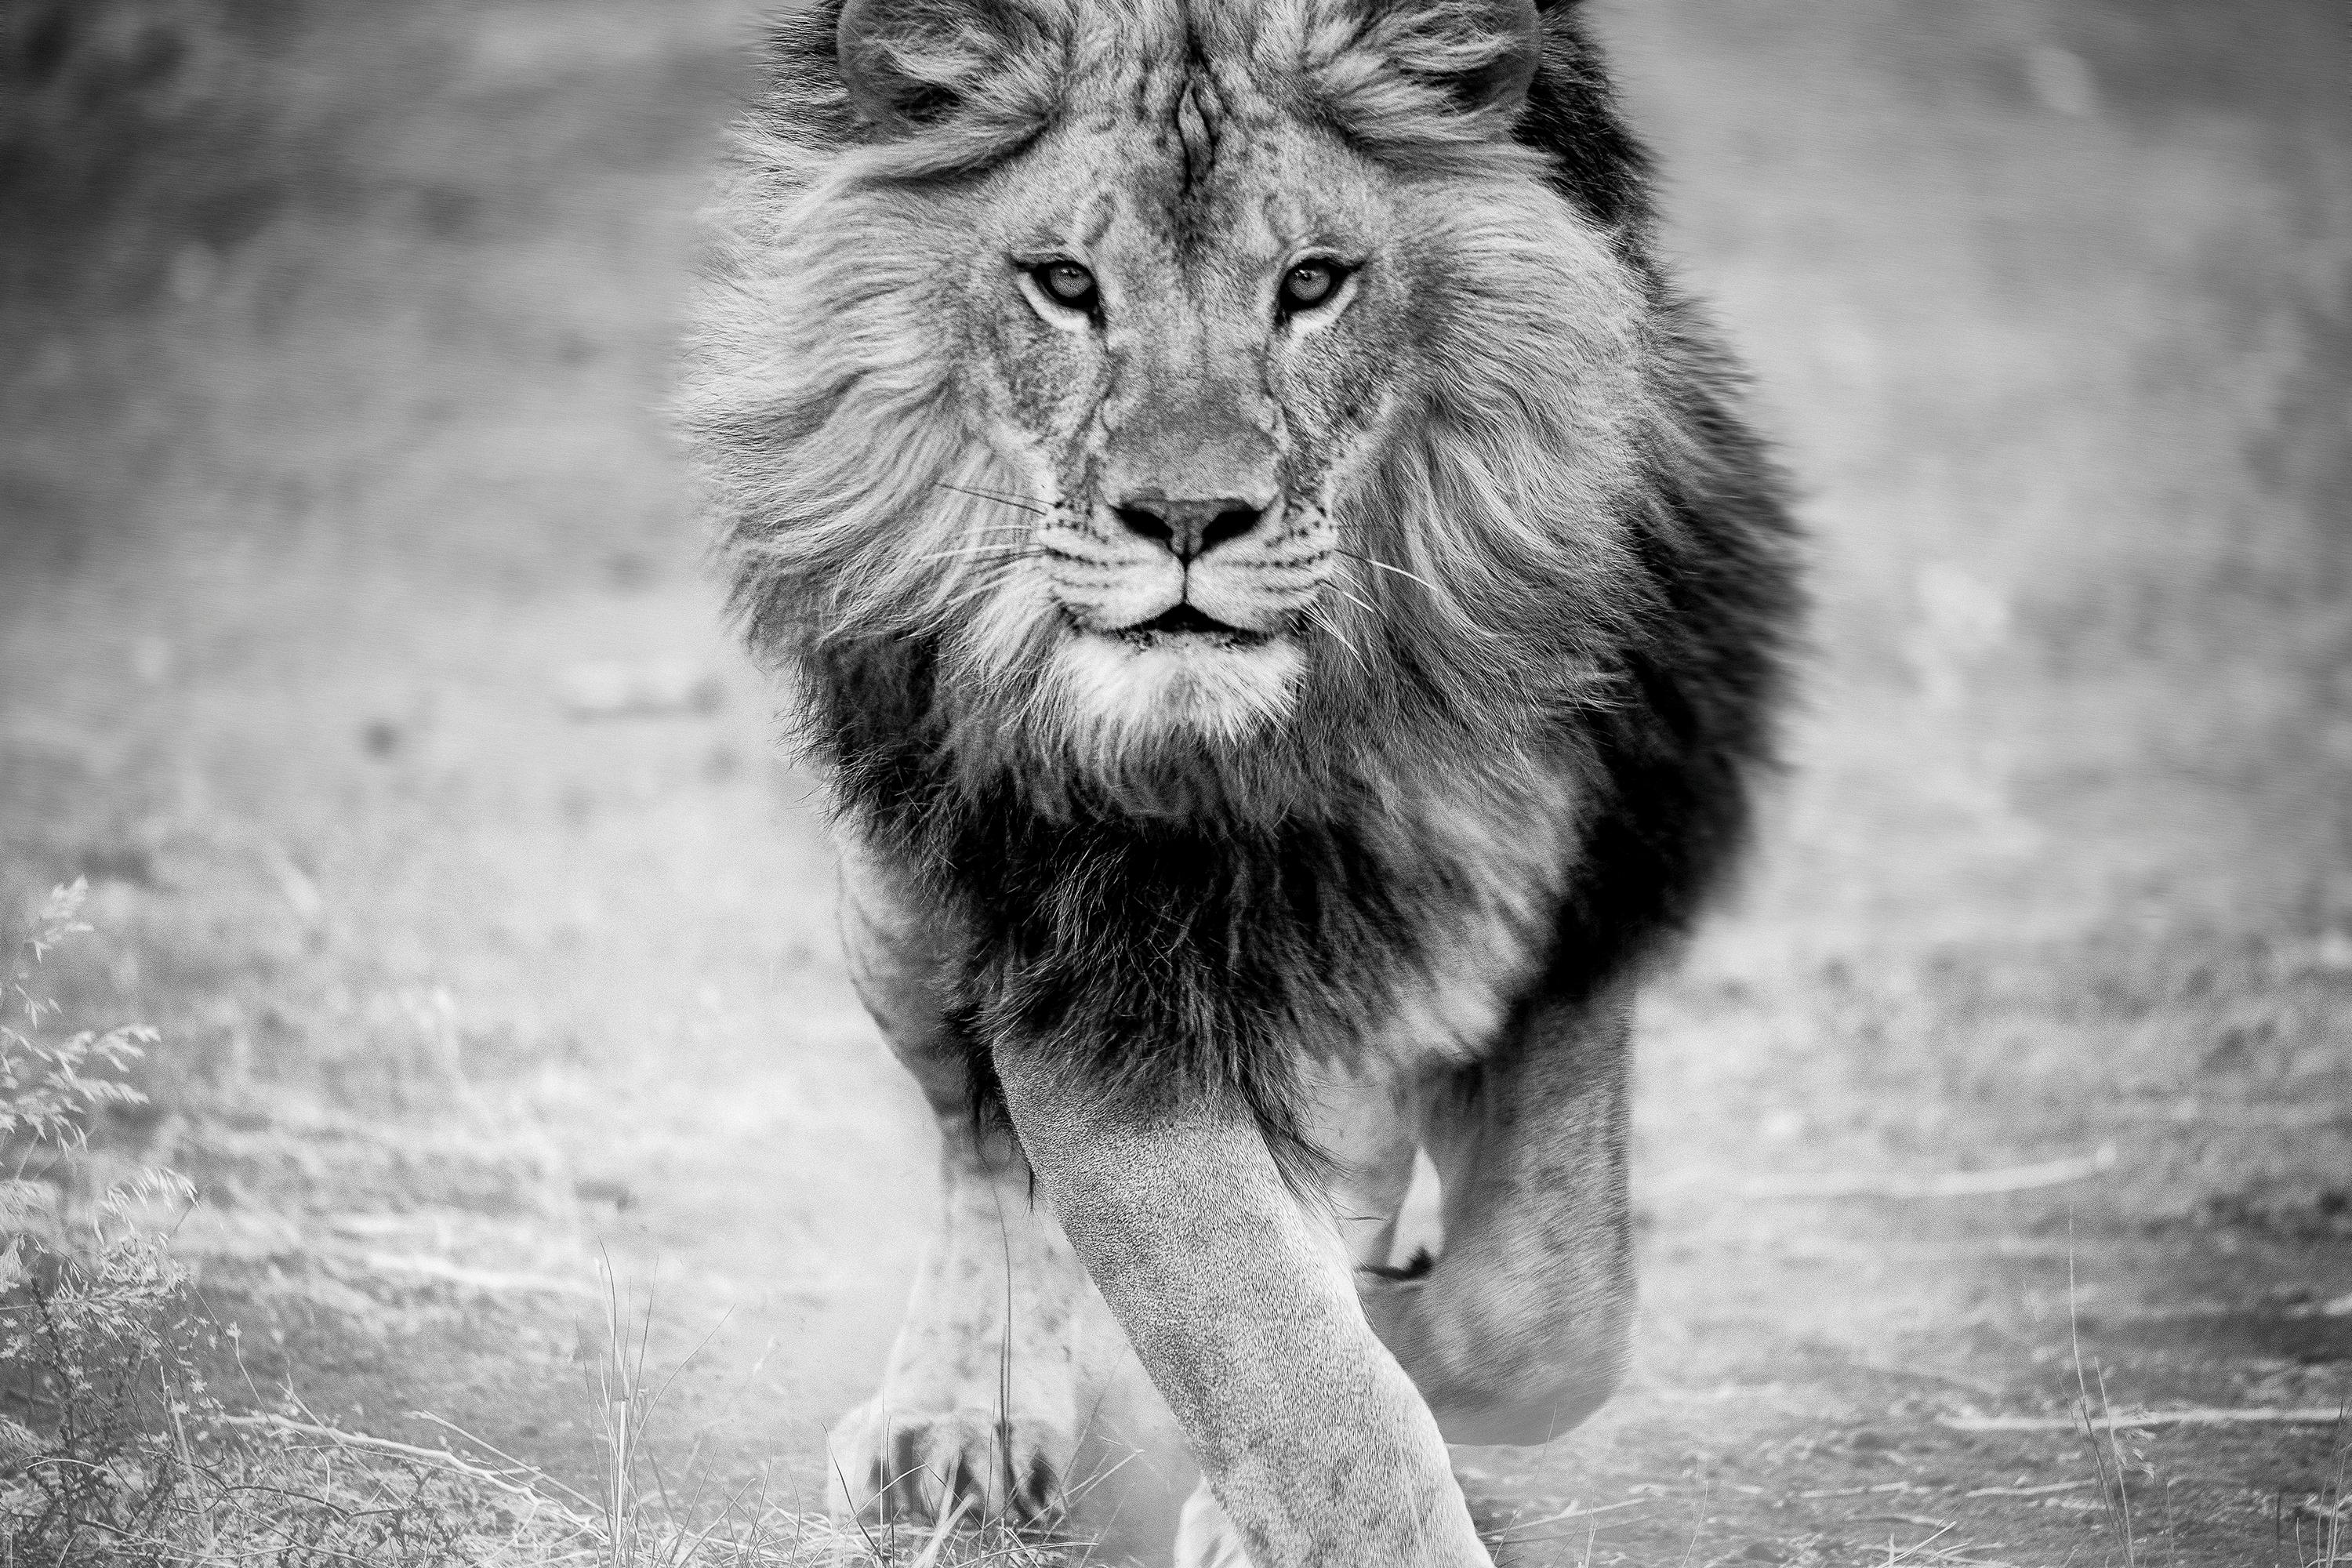 Shane Russeck Animal Print - 1stDibs Special: Panthera Leo 50x60 Black and White Photography Lion - Unsigned 